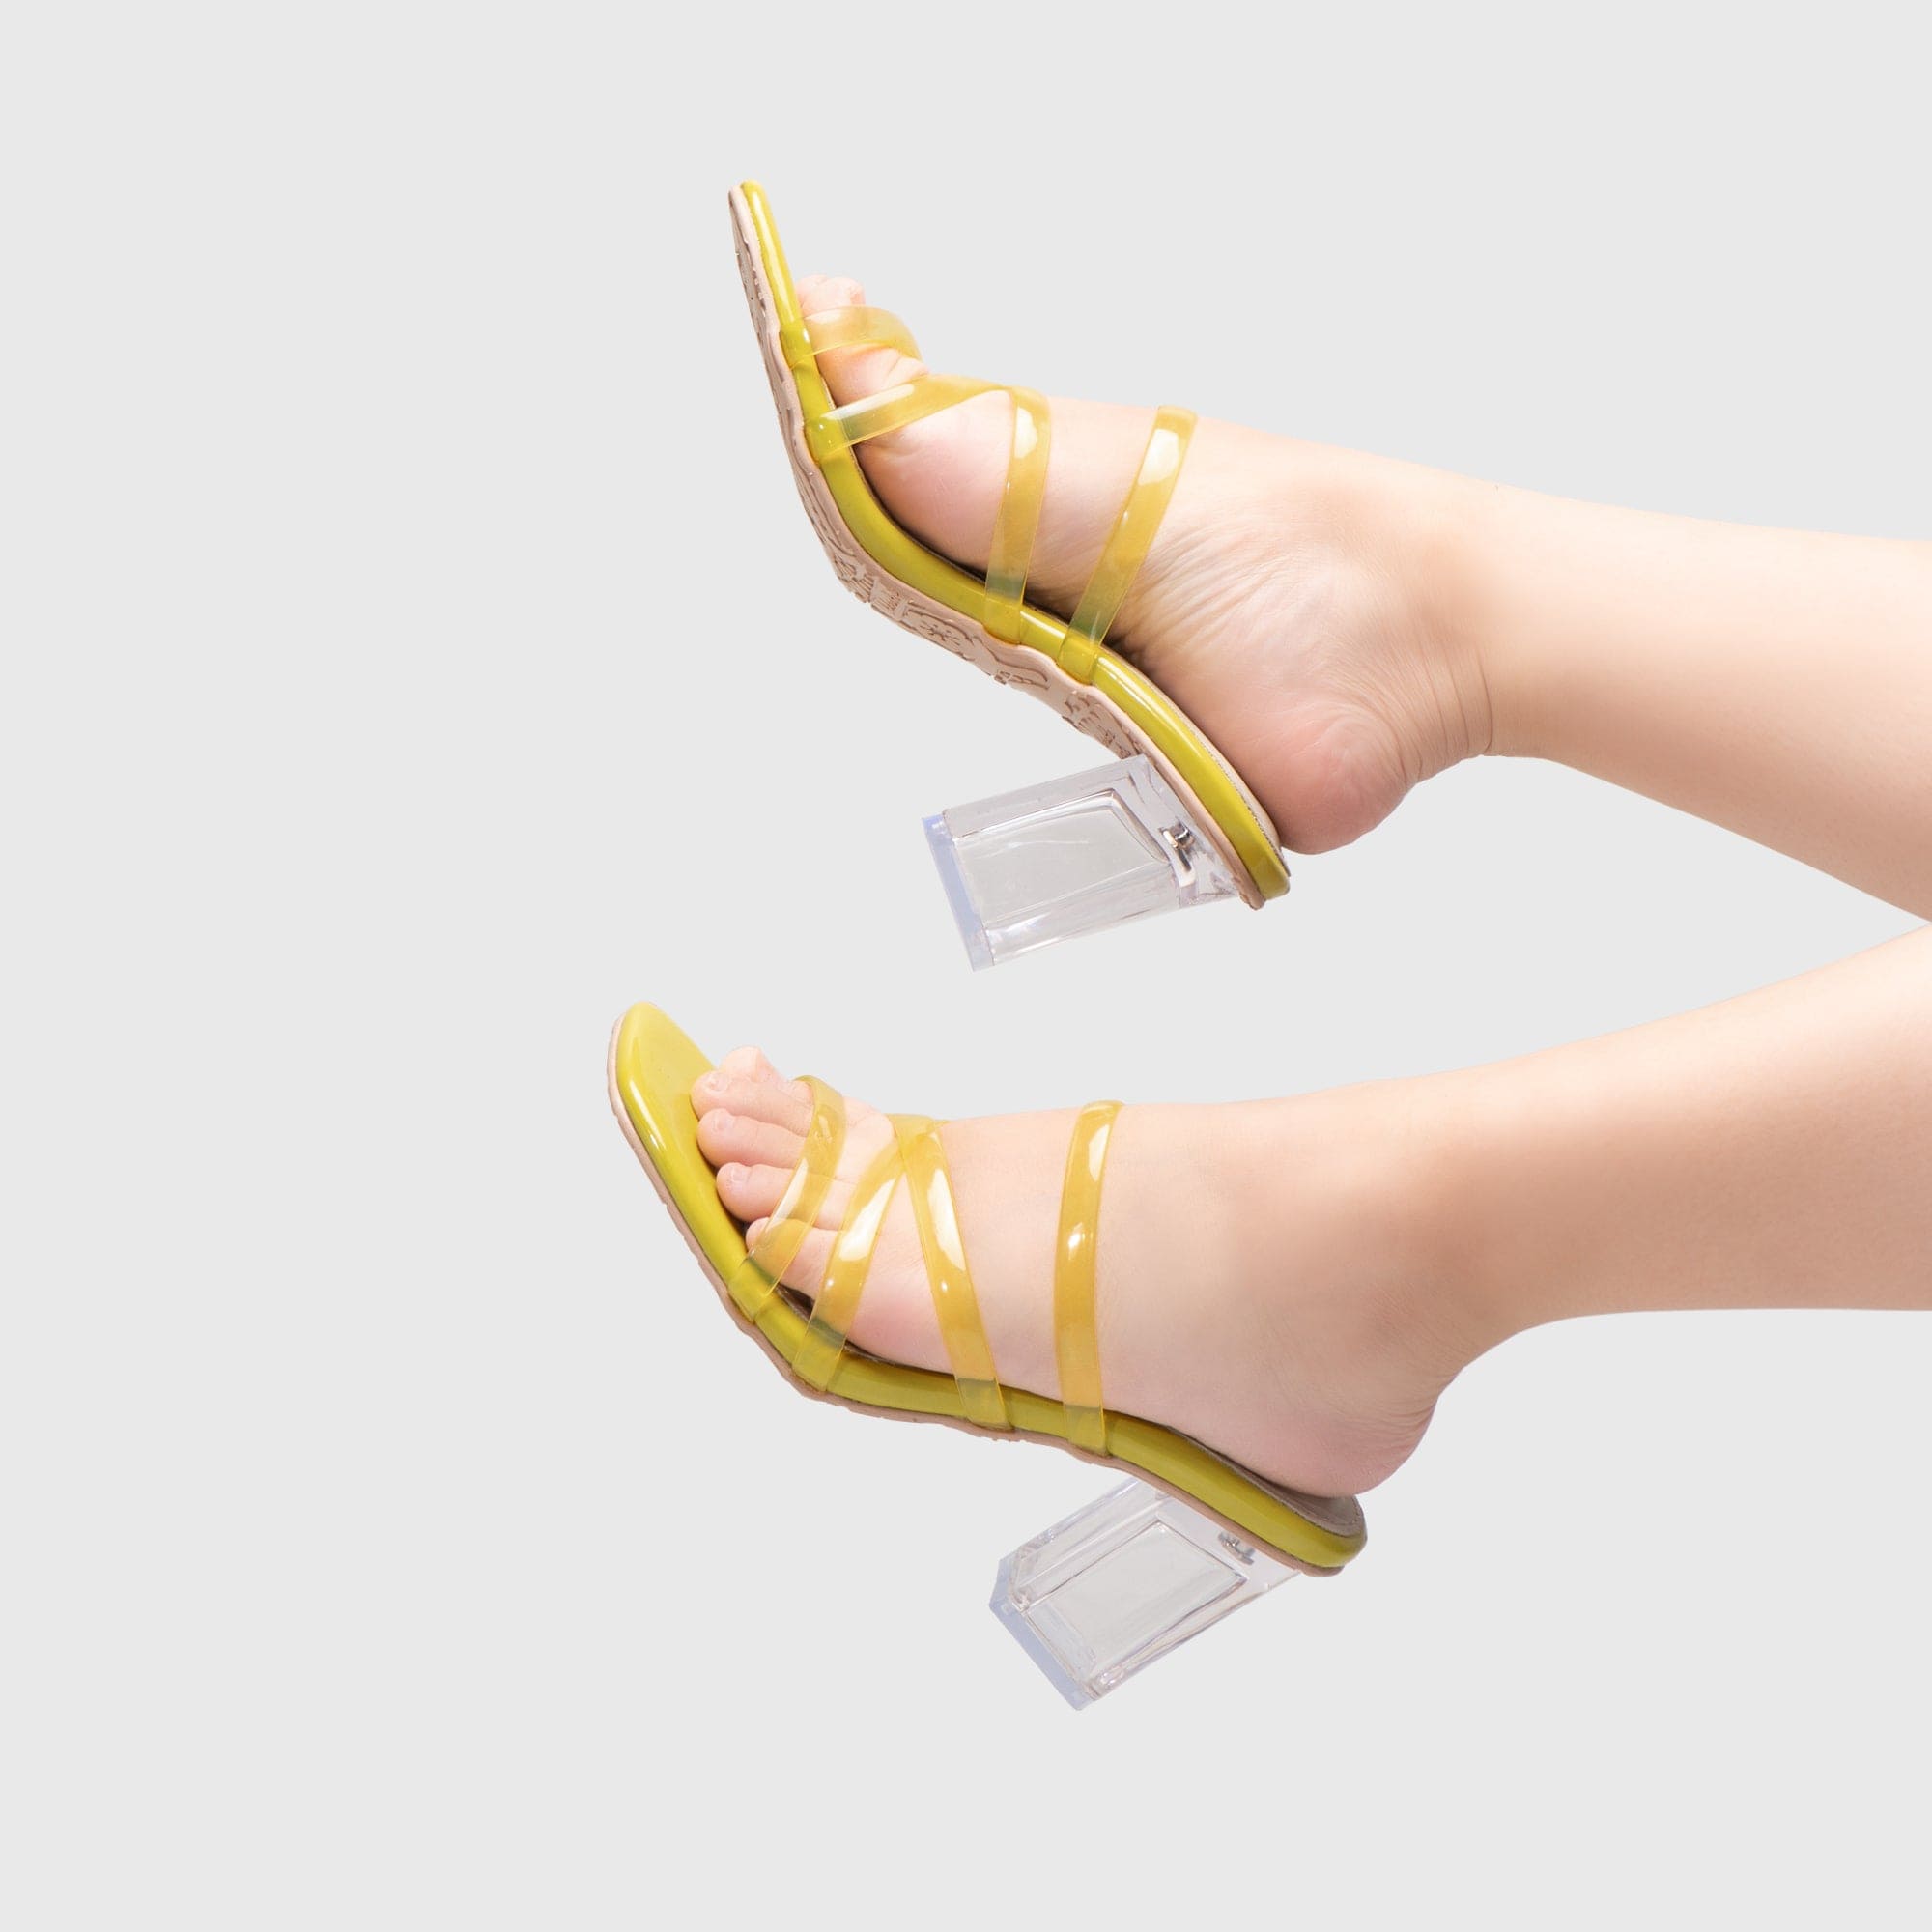 Adorable Projects Official Adorableprojects - Zamilla Heels Lime